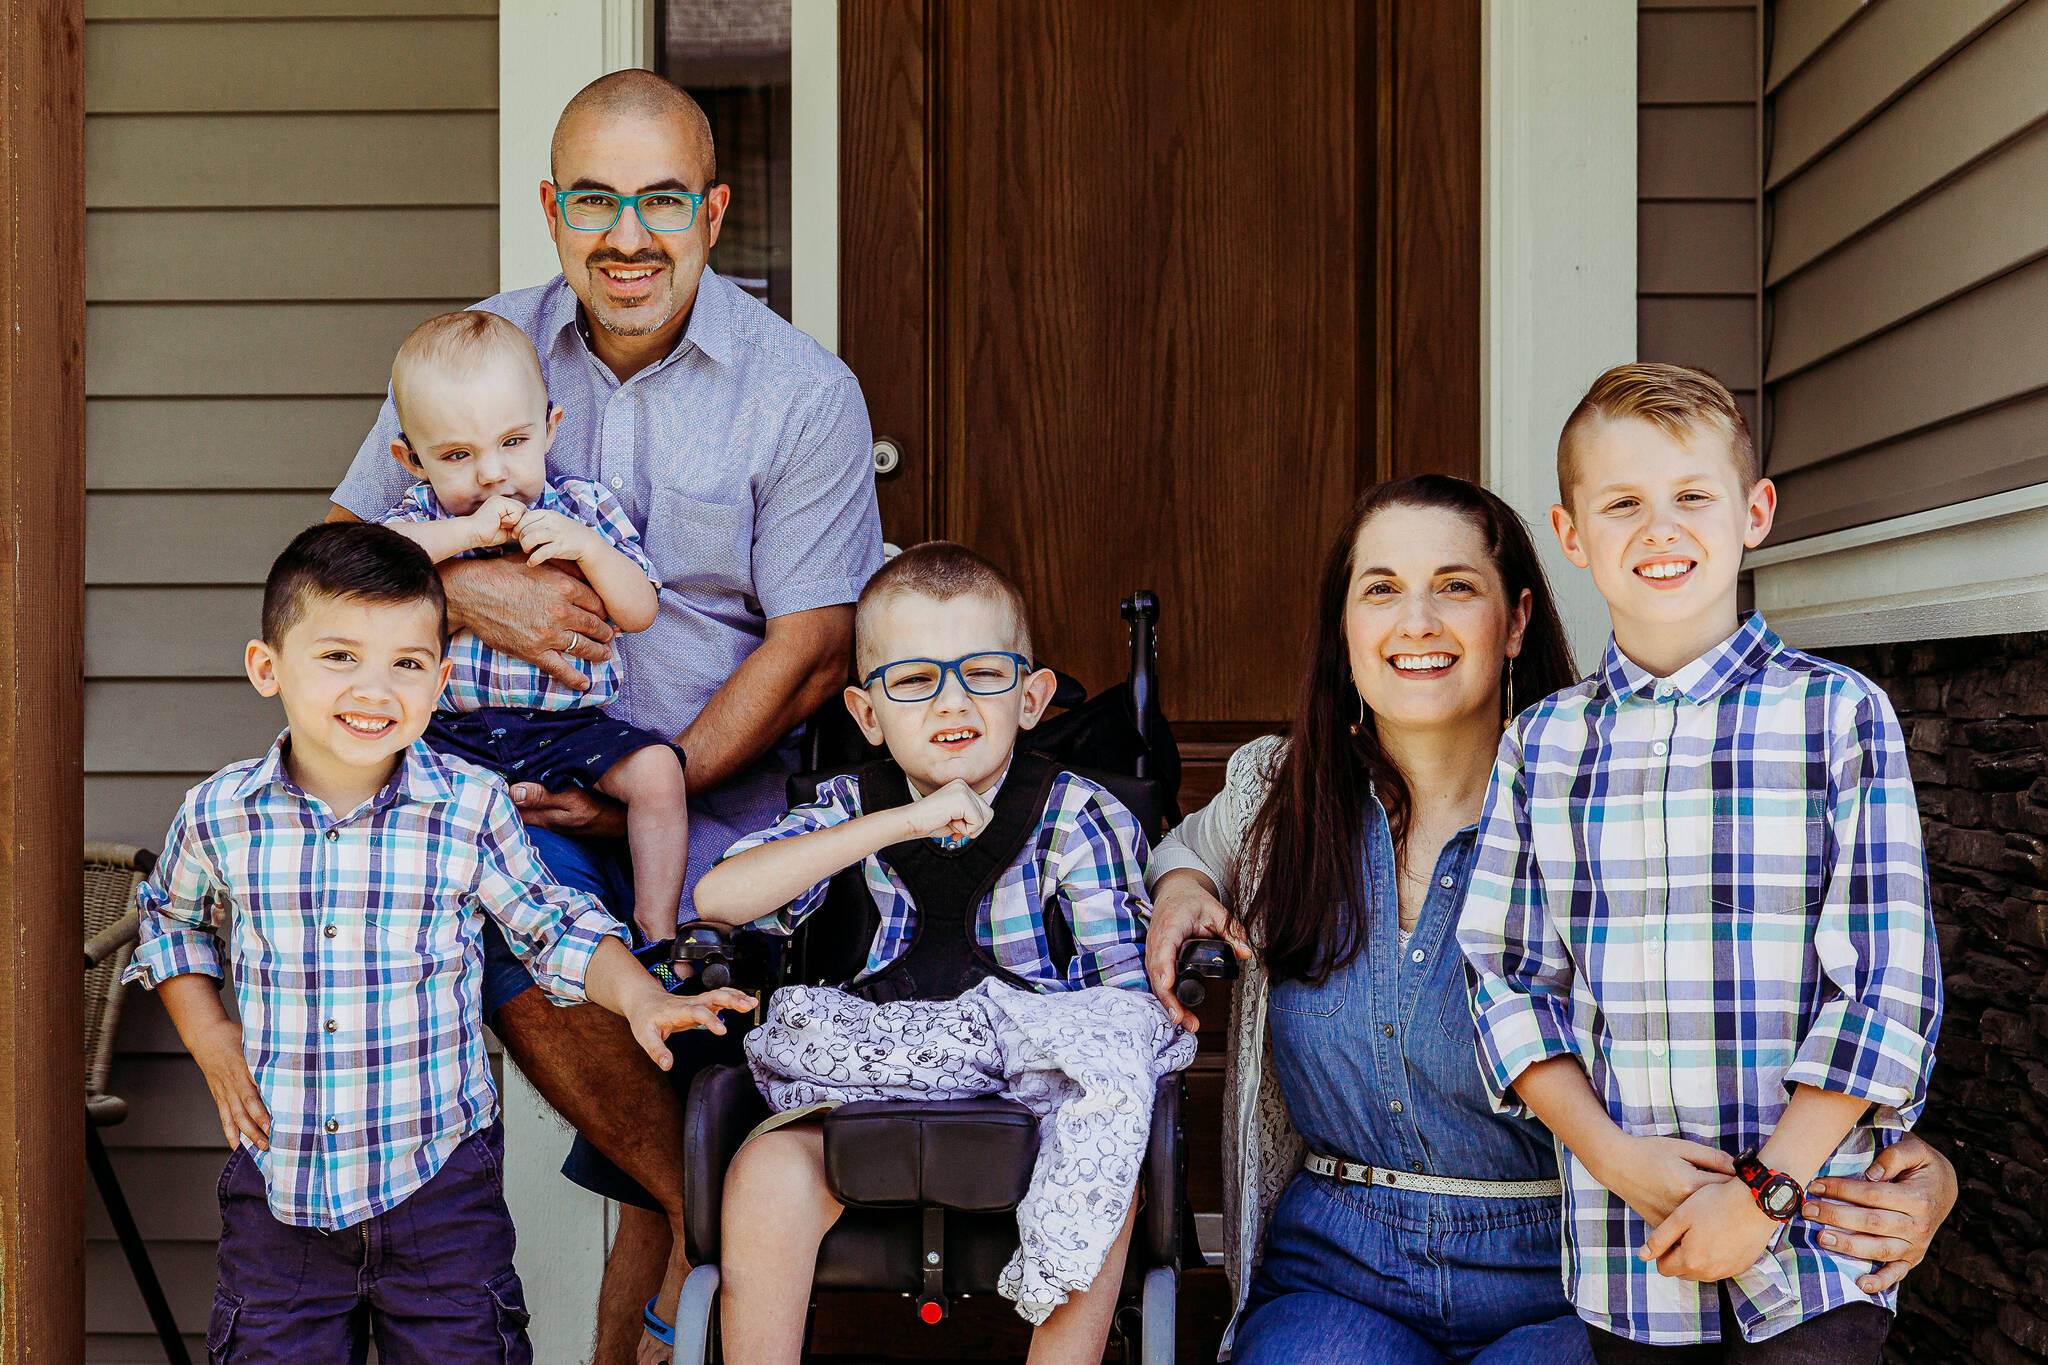 Trevor and Jennifer Barkman of Chilliwack and their adopted children, from left, David, Isaac, Matthew and Jonathan. (Barkman family photo)